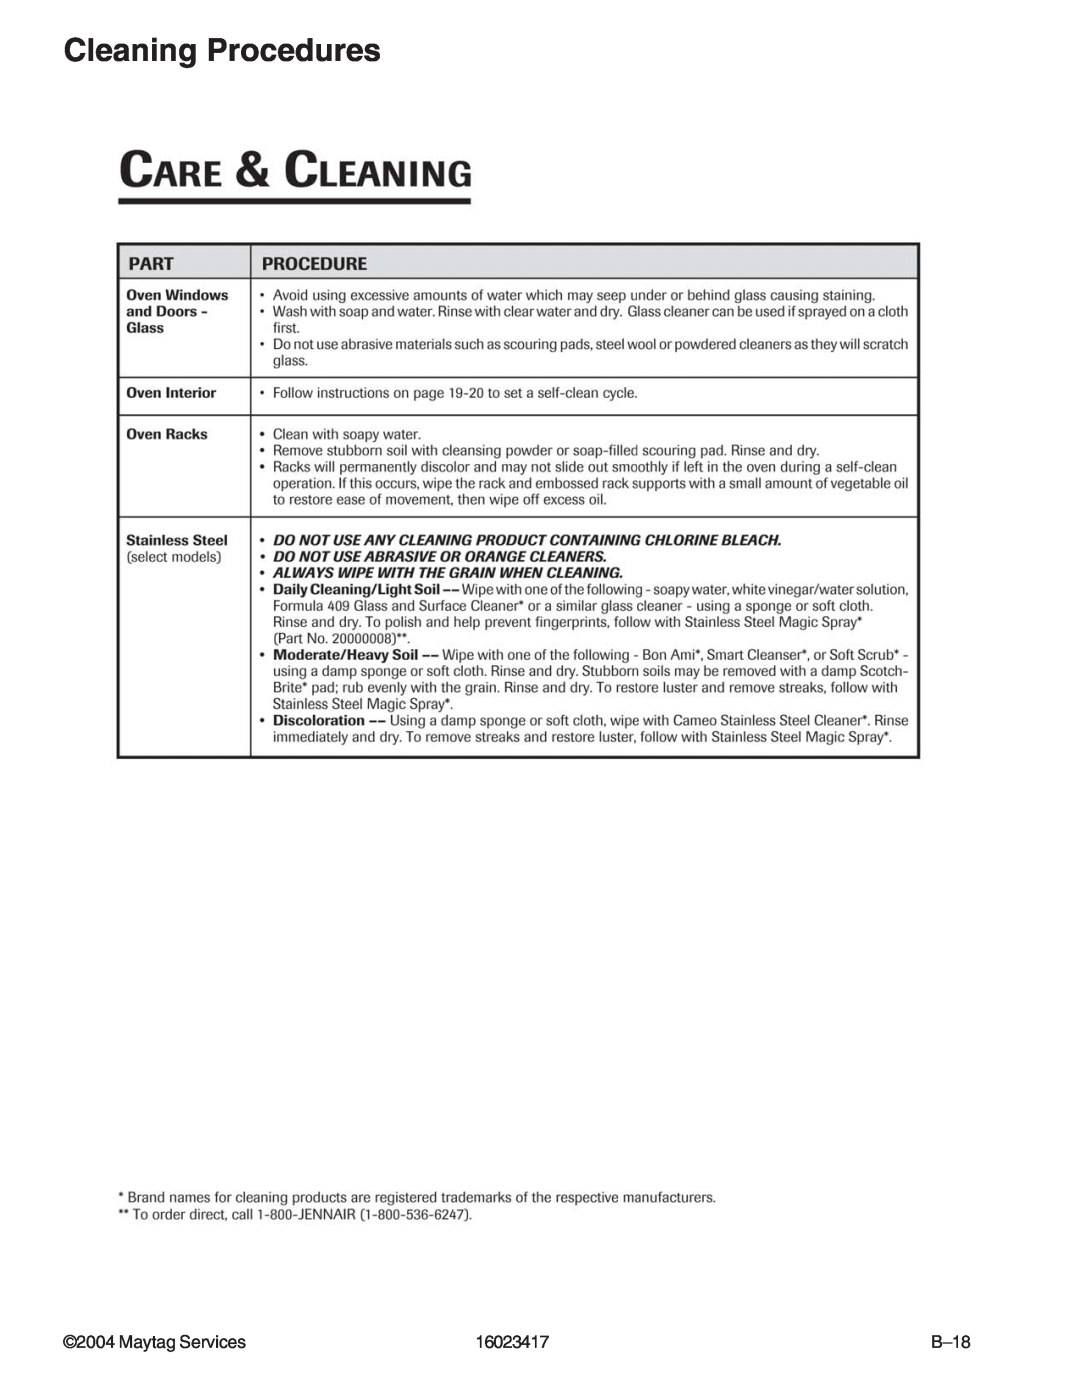 Jenn-Air JDR8895AAB/S/W, JDR8895ACS/W manual Cleaning Procedures, Maytag Services, 16023417, B–18 